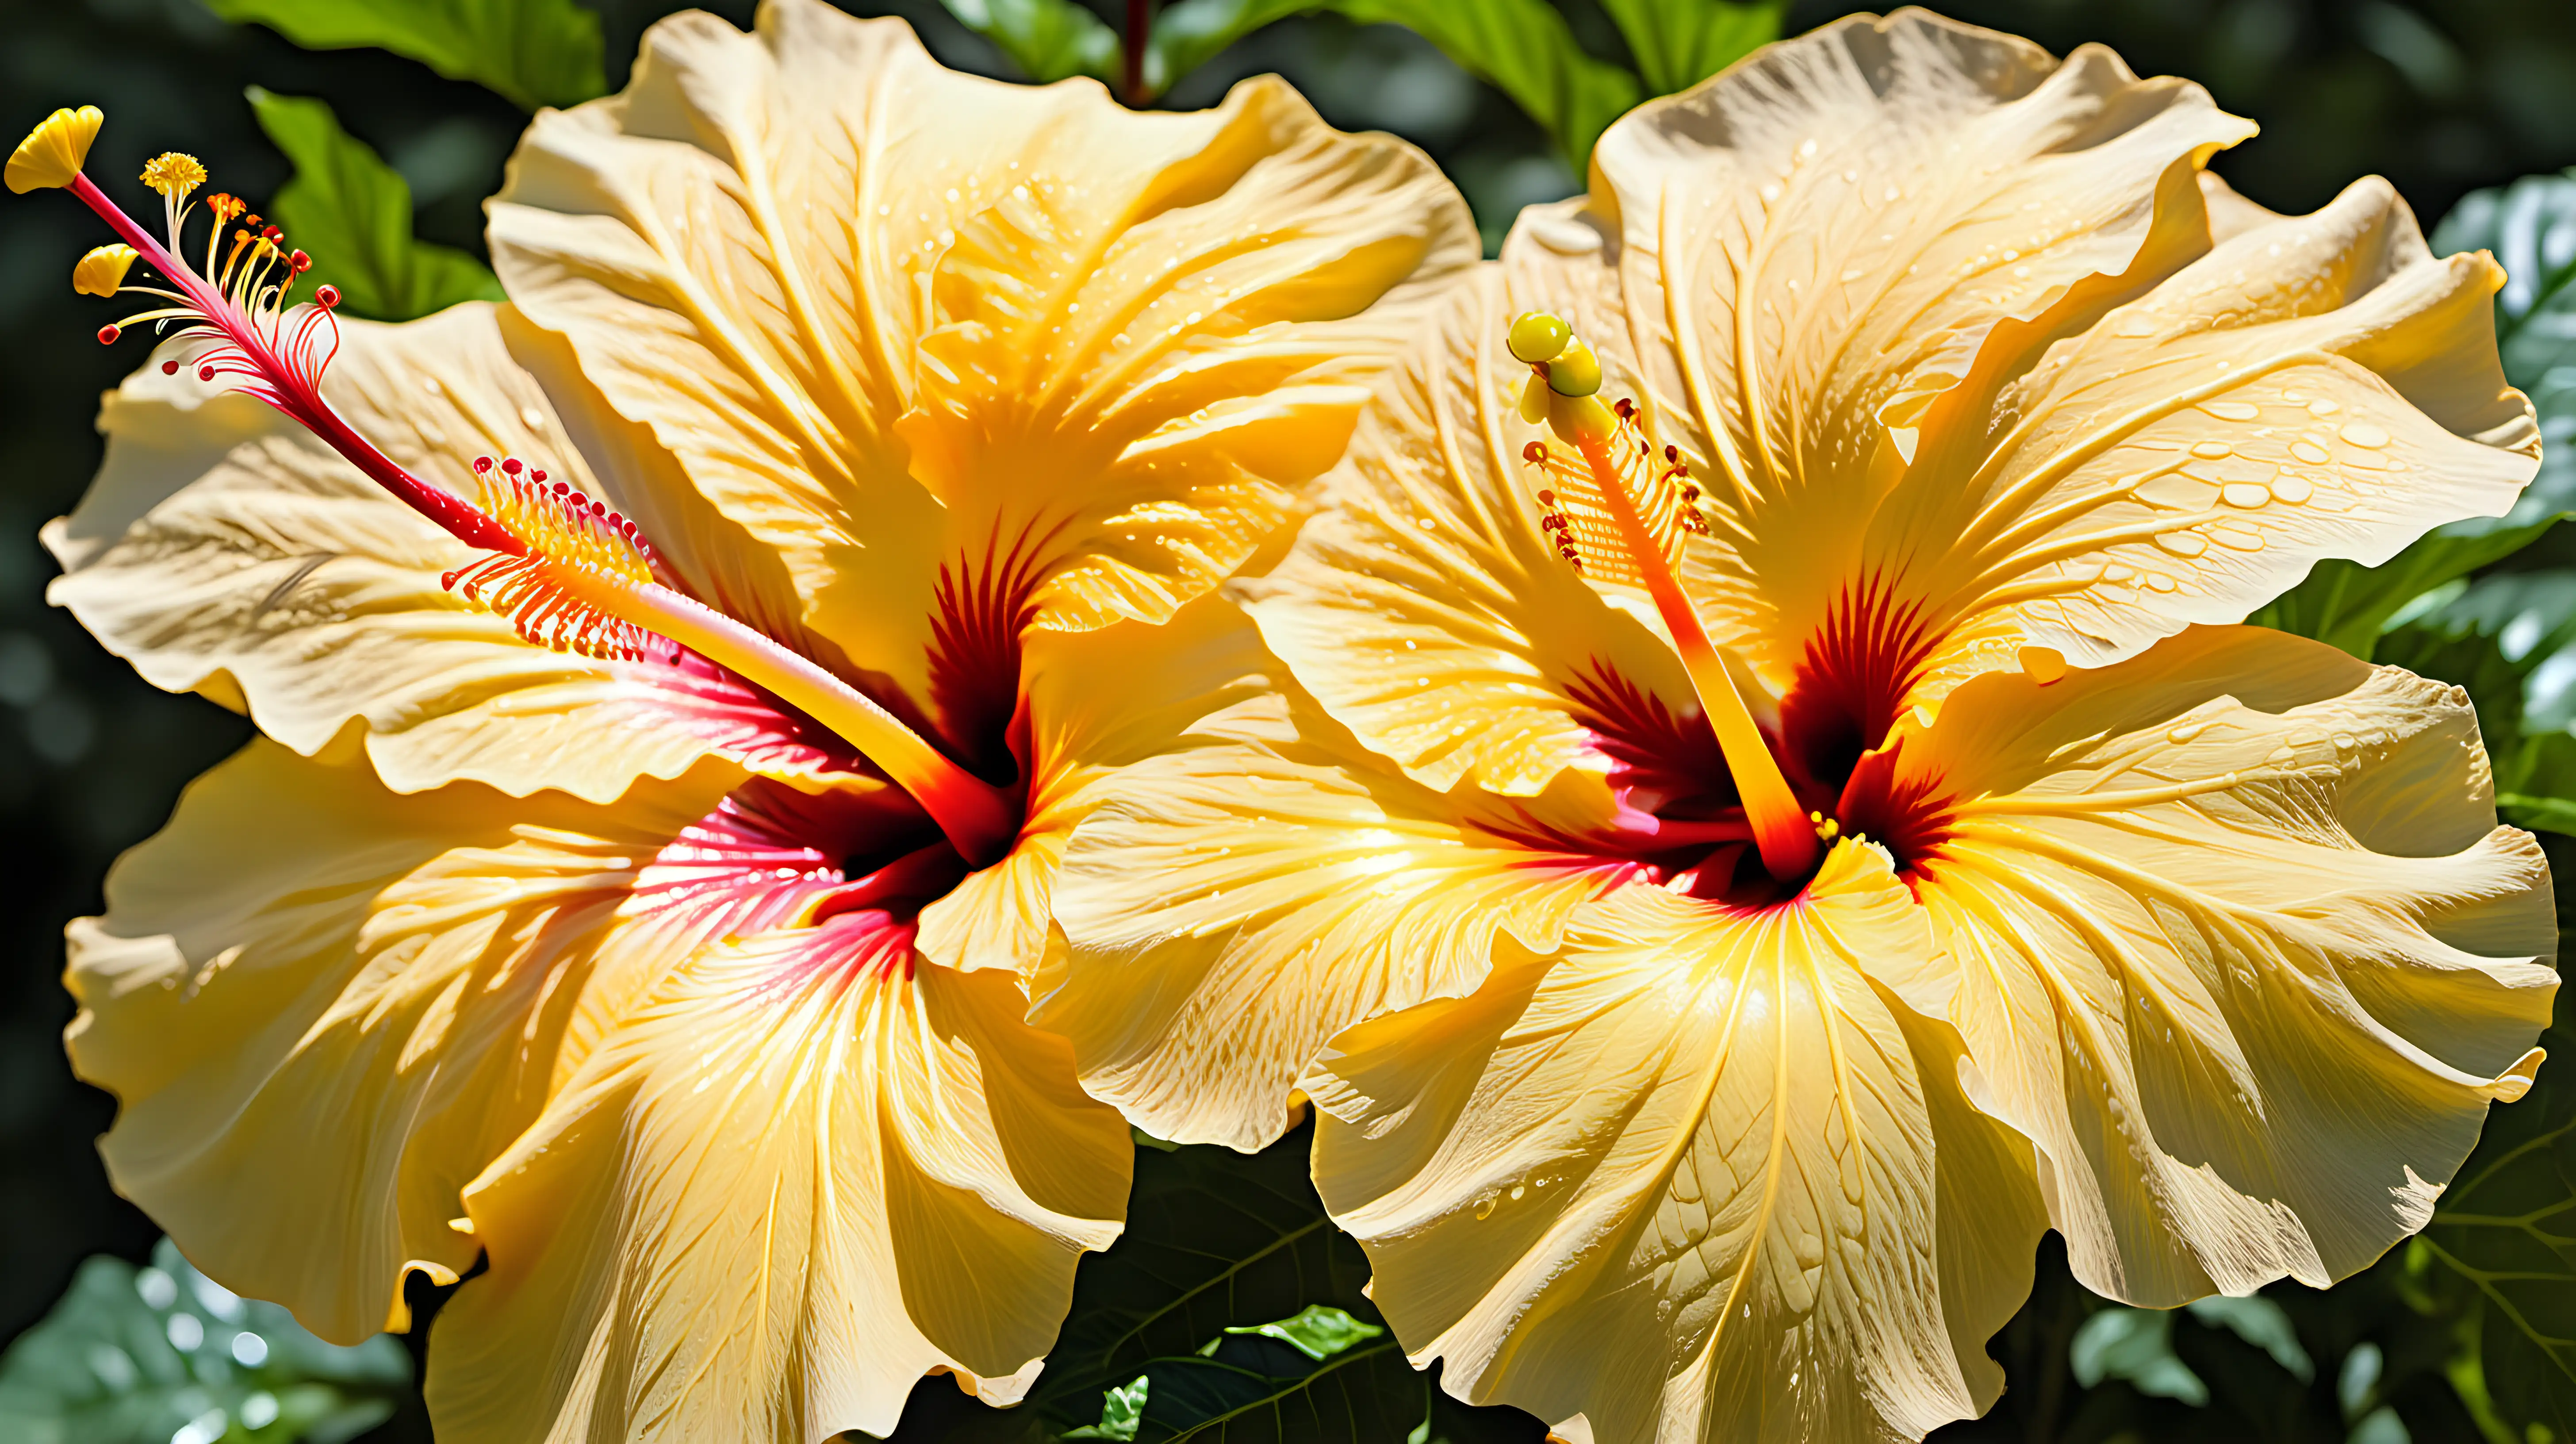 Vibrant Summer Bloom Captivating Details of a Large Yellow Hibiscus Flower